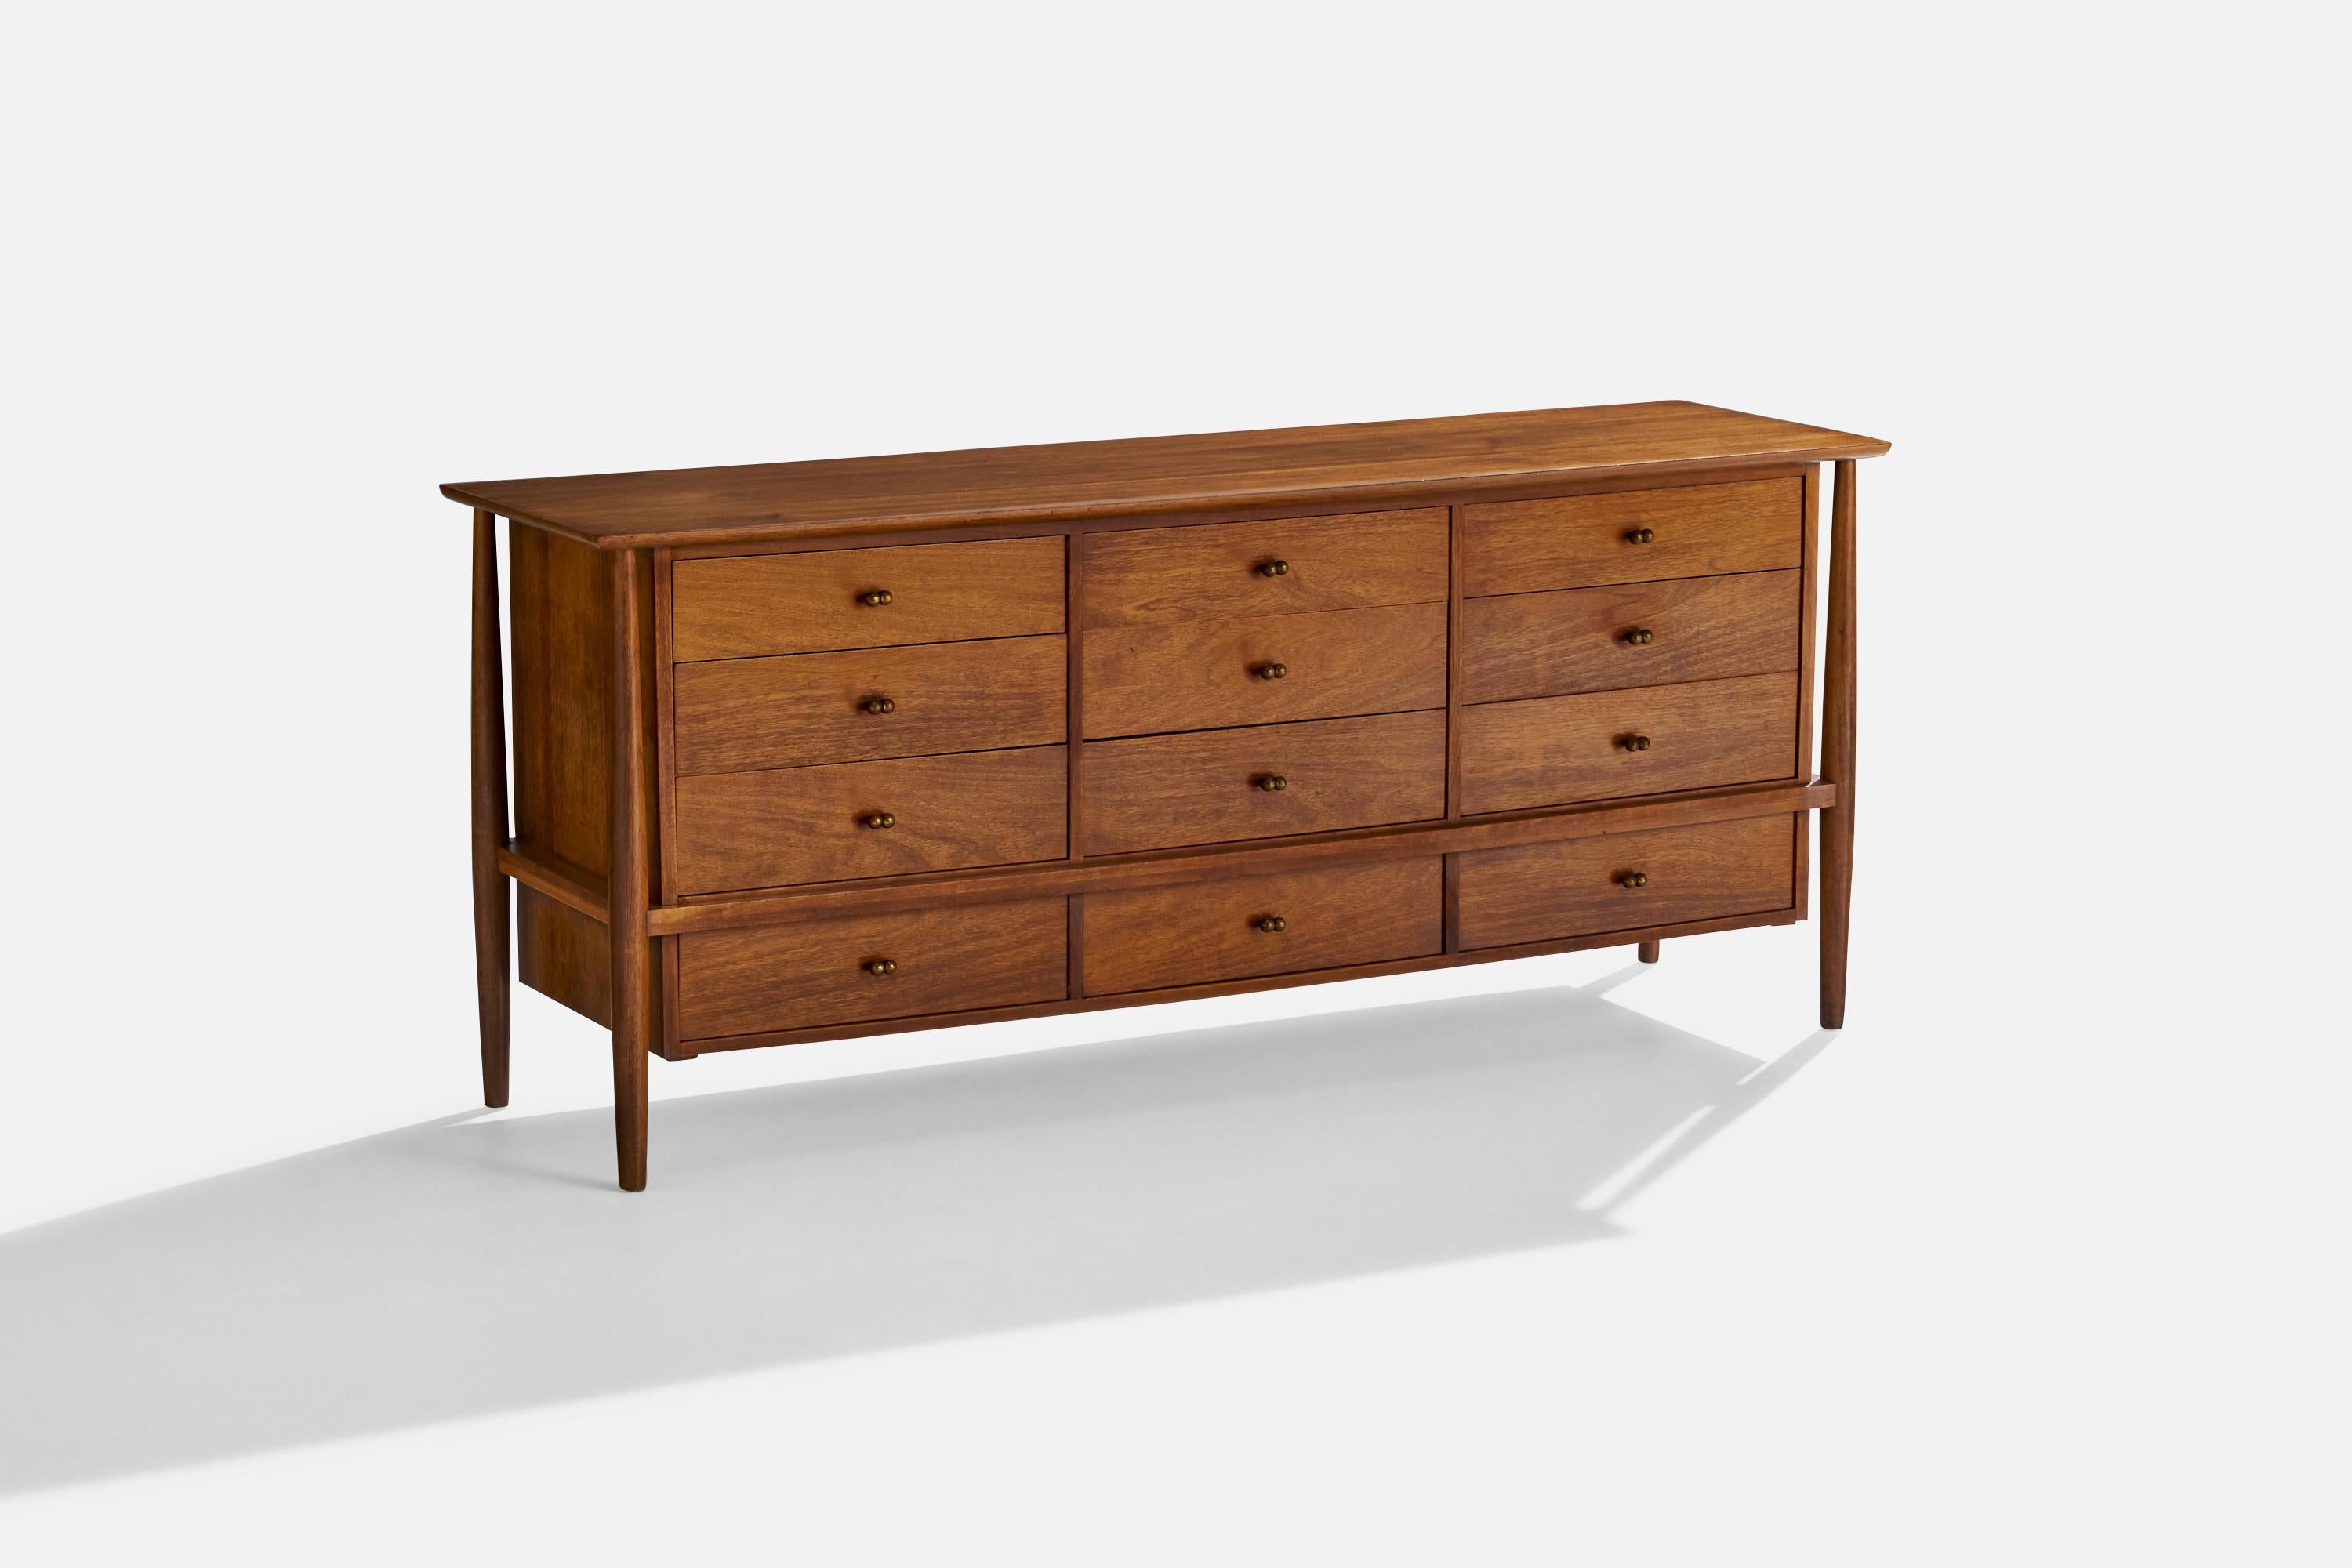 A walnut and brass dresser designed and produced by Mount Airy, USA, 1950s.